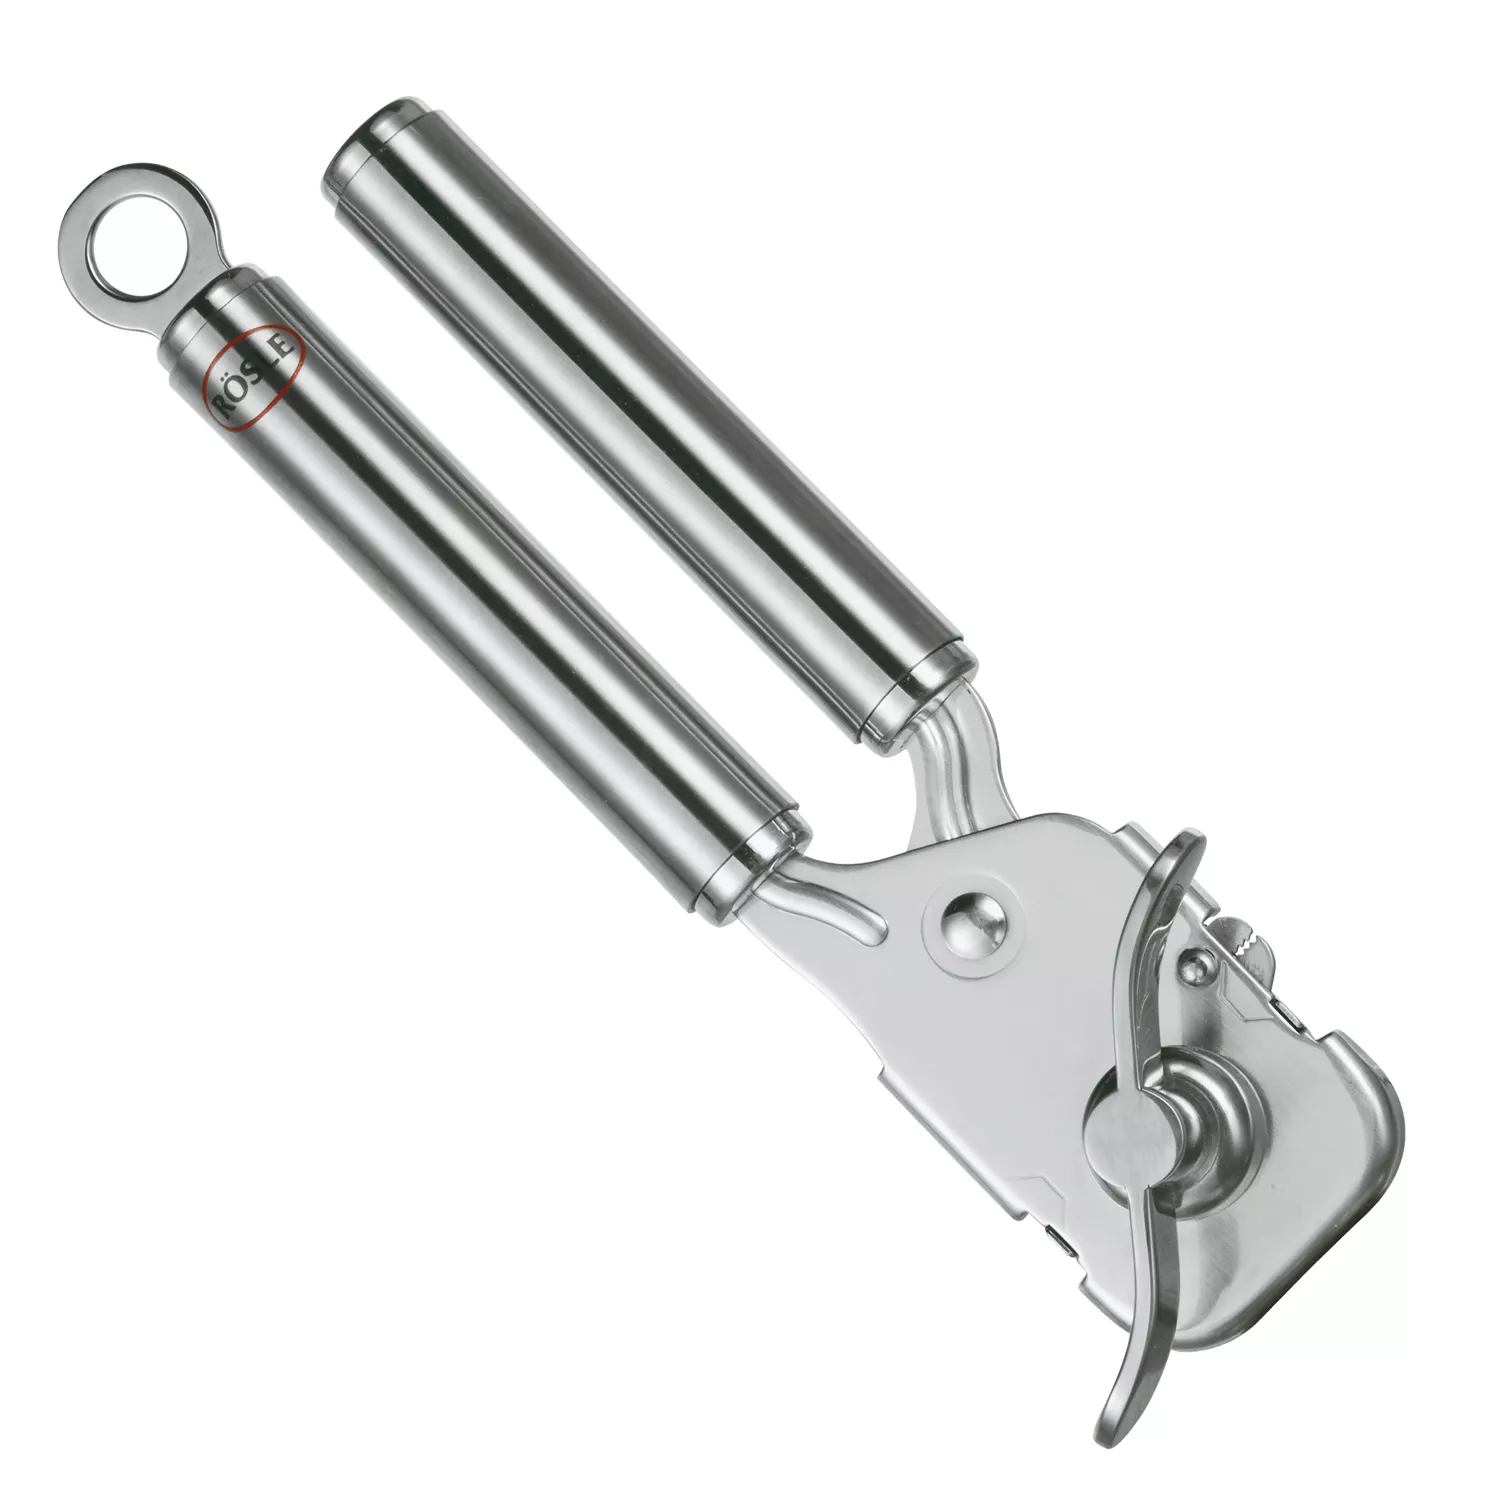 Rosle Can Opener with Plier Grip